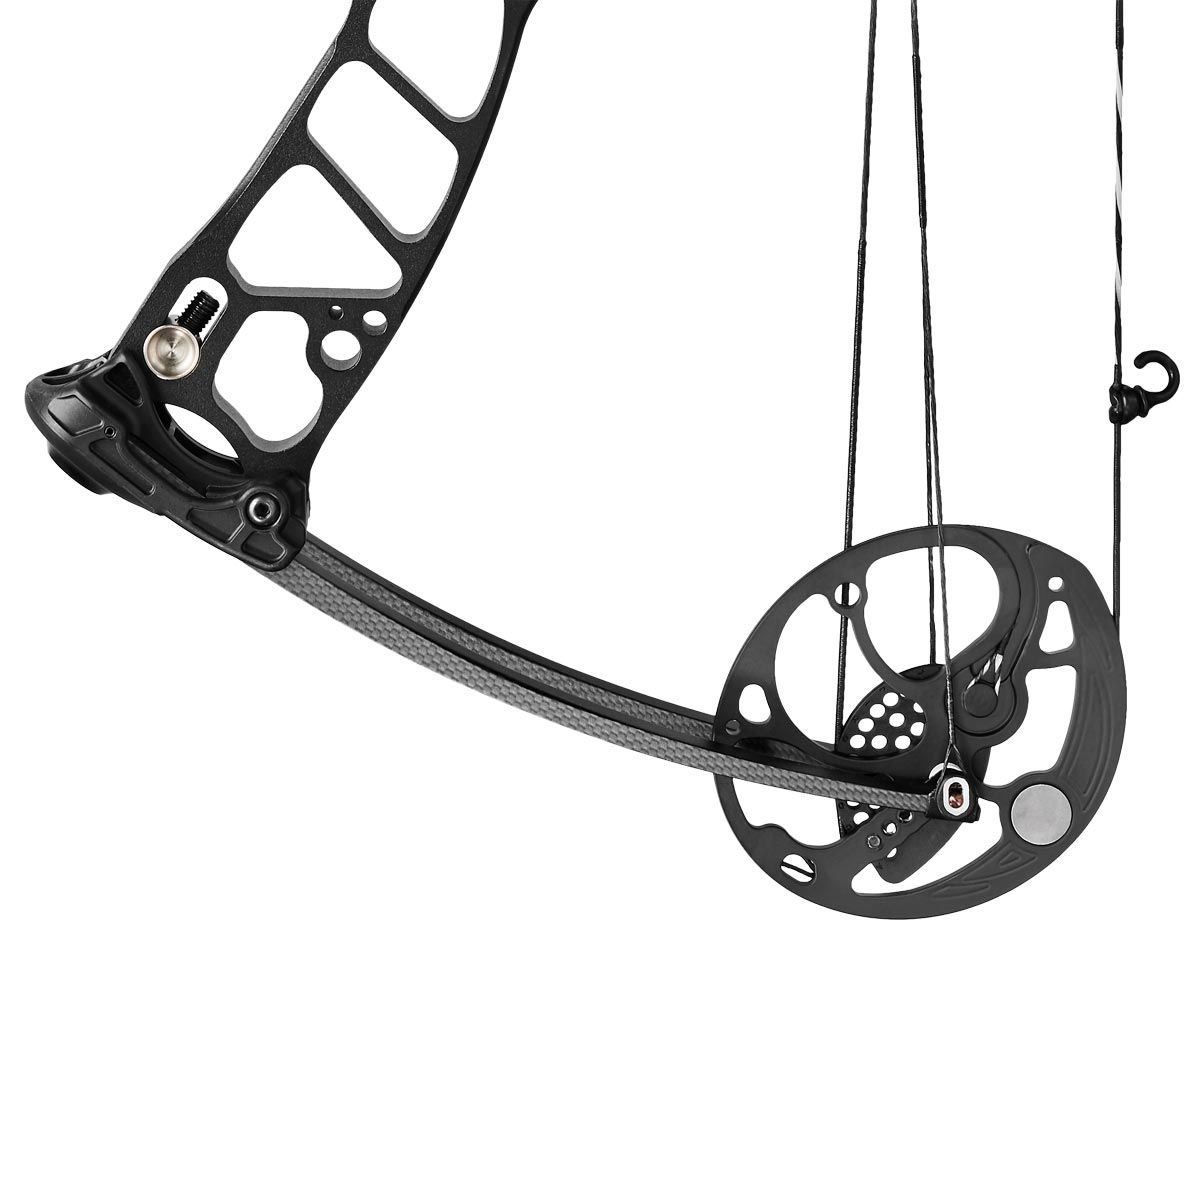 Mission Switch Compound Bow | Creed Archery Supply